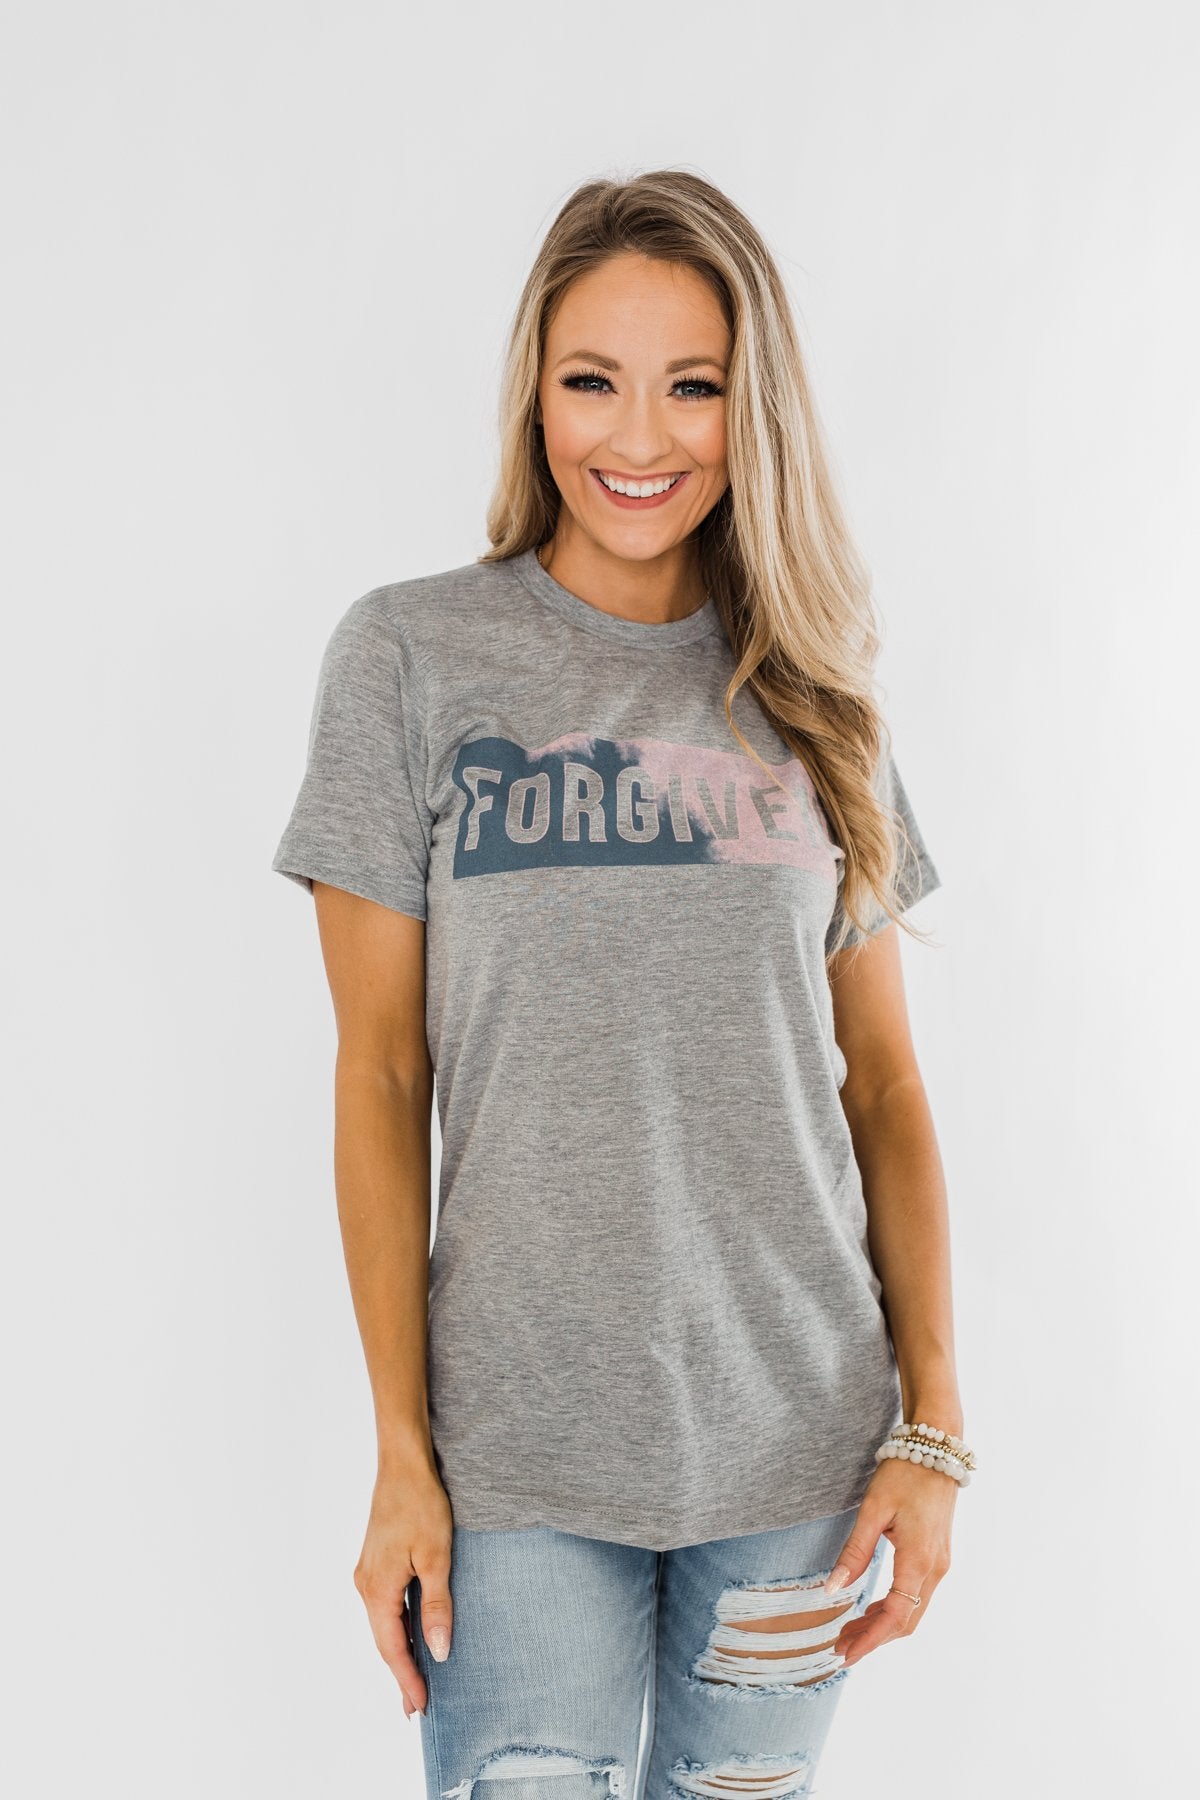 "Forgiven" Graphic Tee- Grey